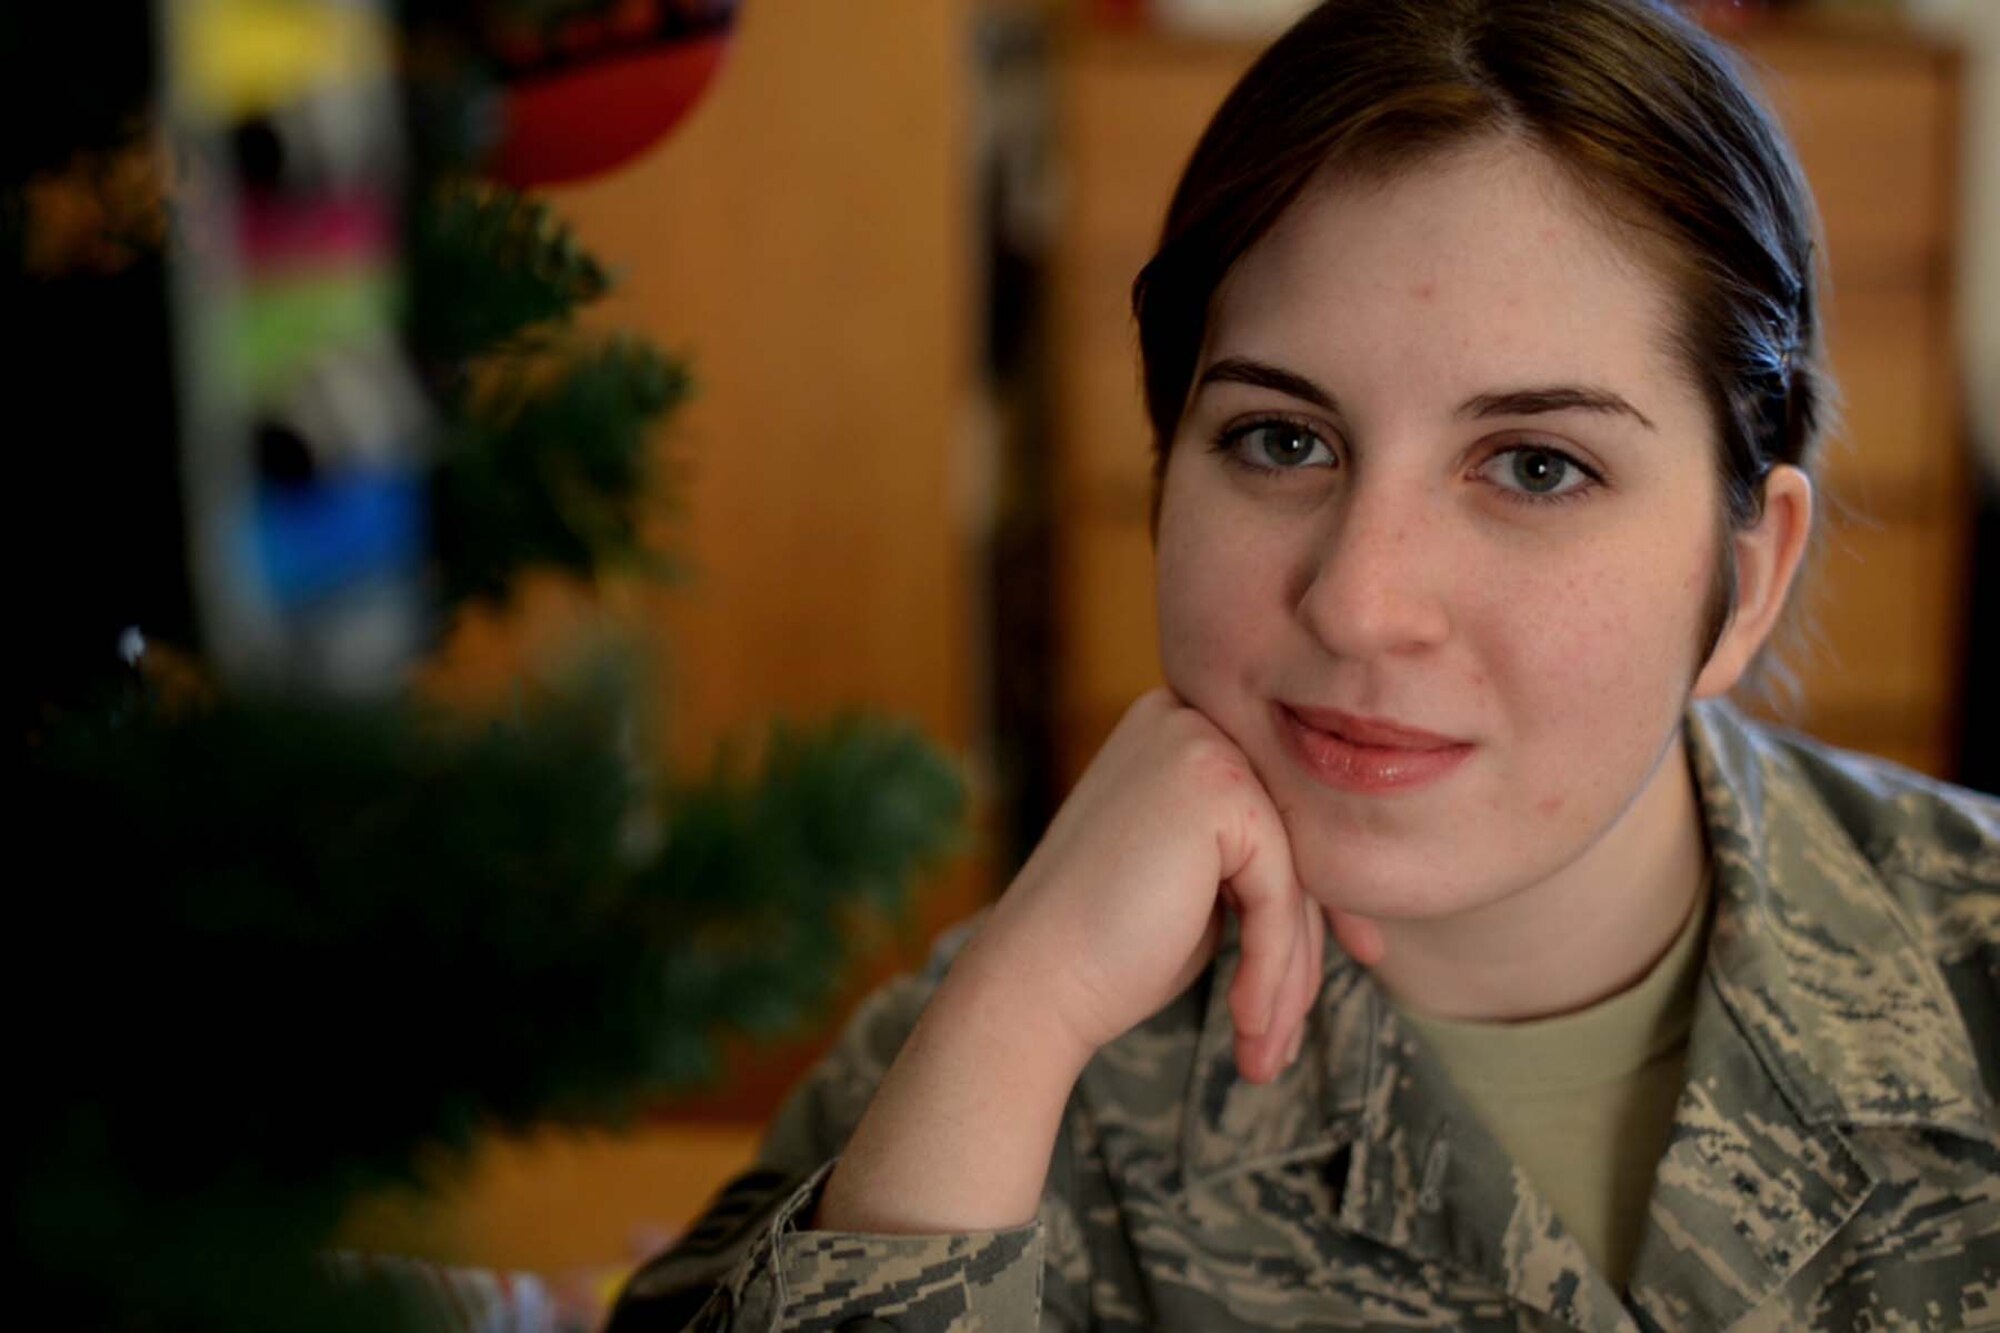 Senior Airman Lucille Perkins-Wagel, 28th Force Support Squadron services technician, will have spent the last three holiday seasons away from her family. Each year, Perkins-Wagel goes to great lengths to ensure the season of fellowship and holiday cheer never loses its meaning. (U.S. Air Force Photo by Senior Airman Jordan Thompson/Released)